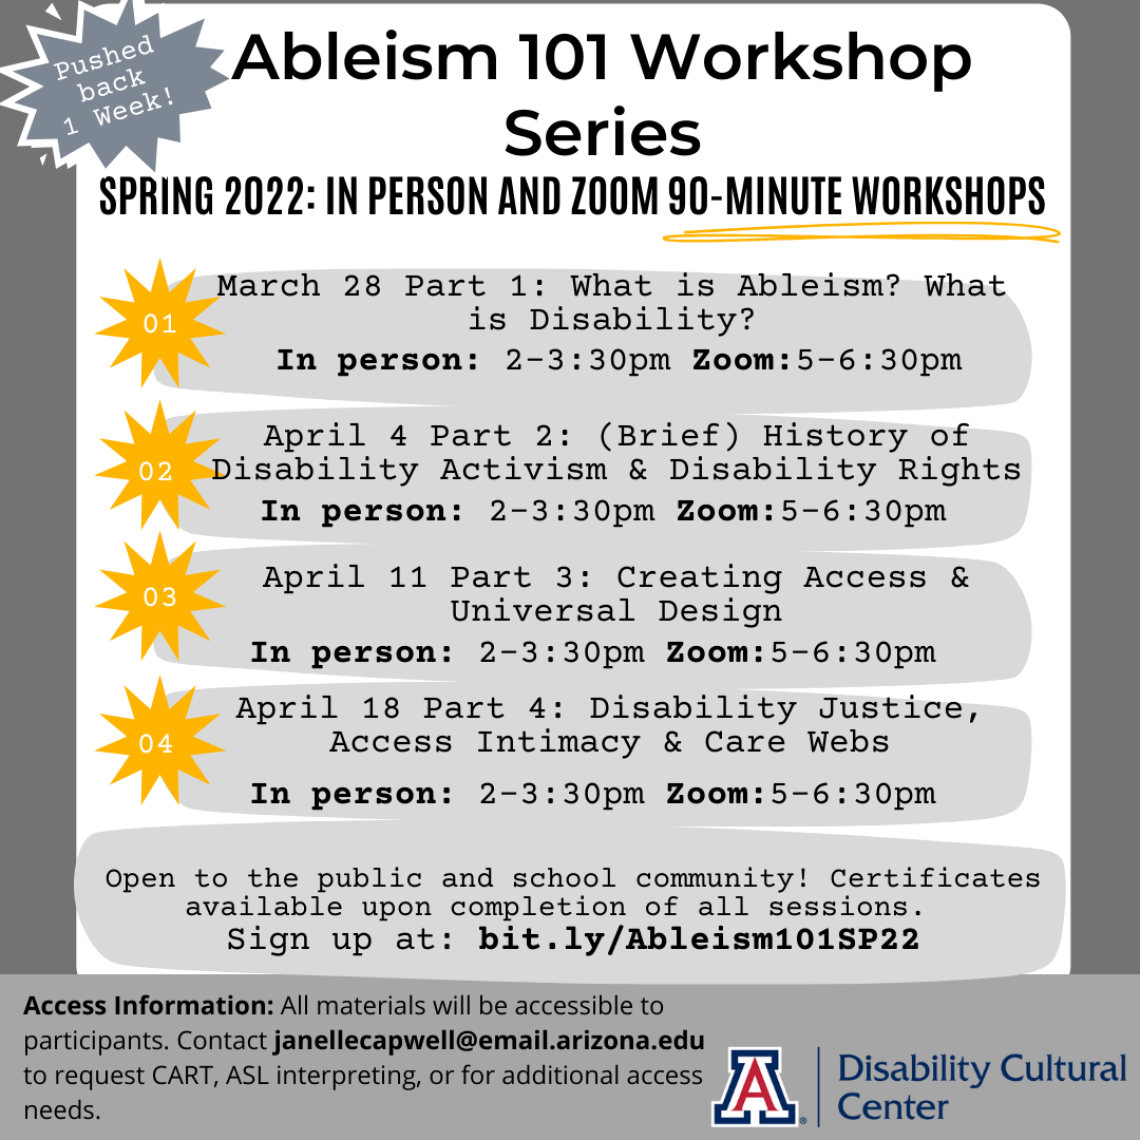 Flyer for the Ableism 101 Spring 22 Series